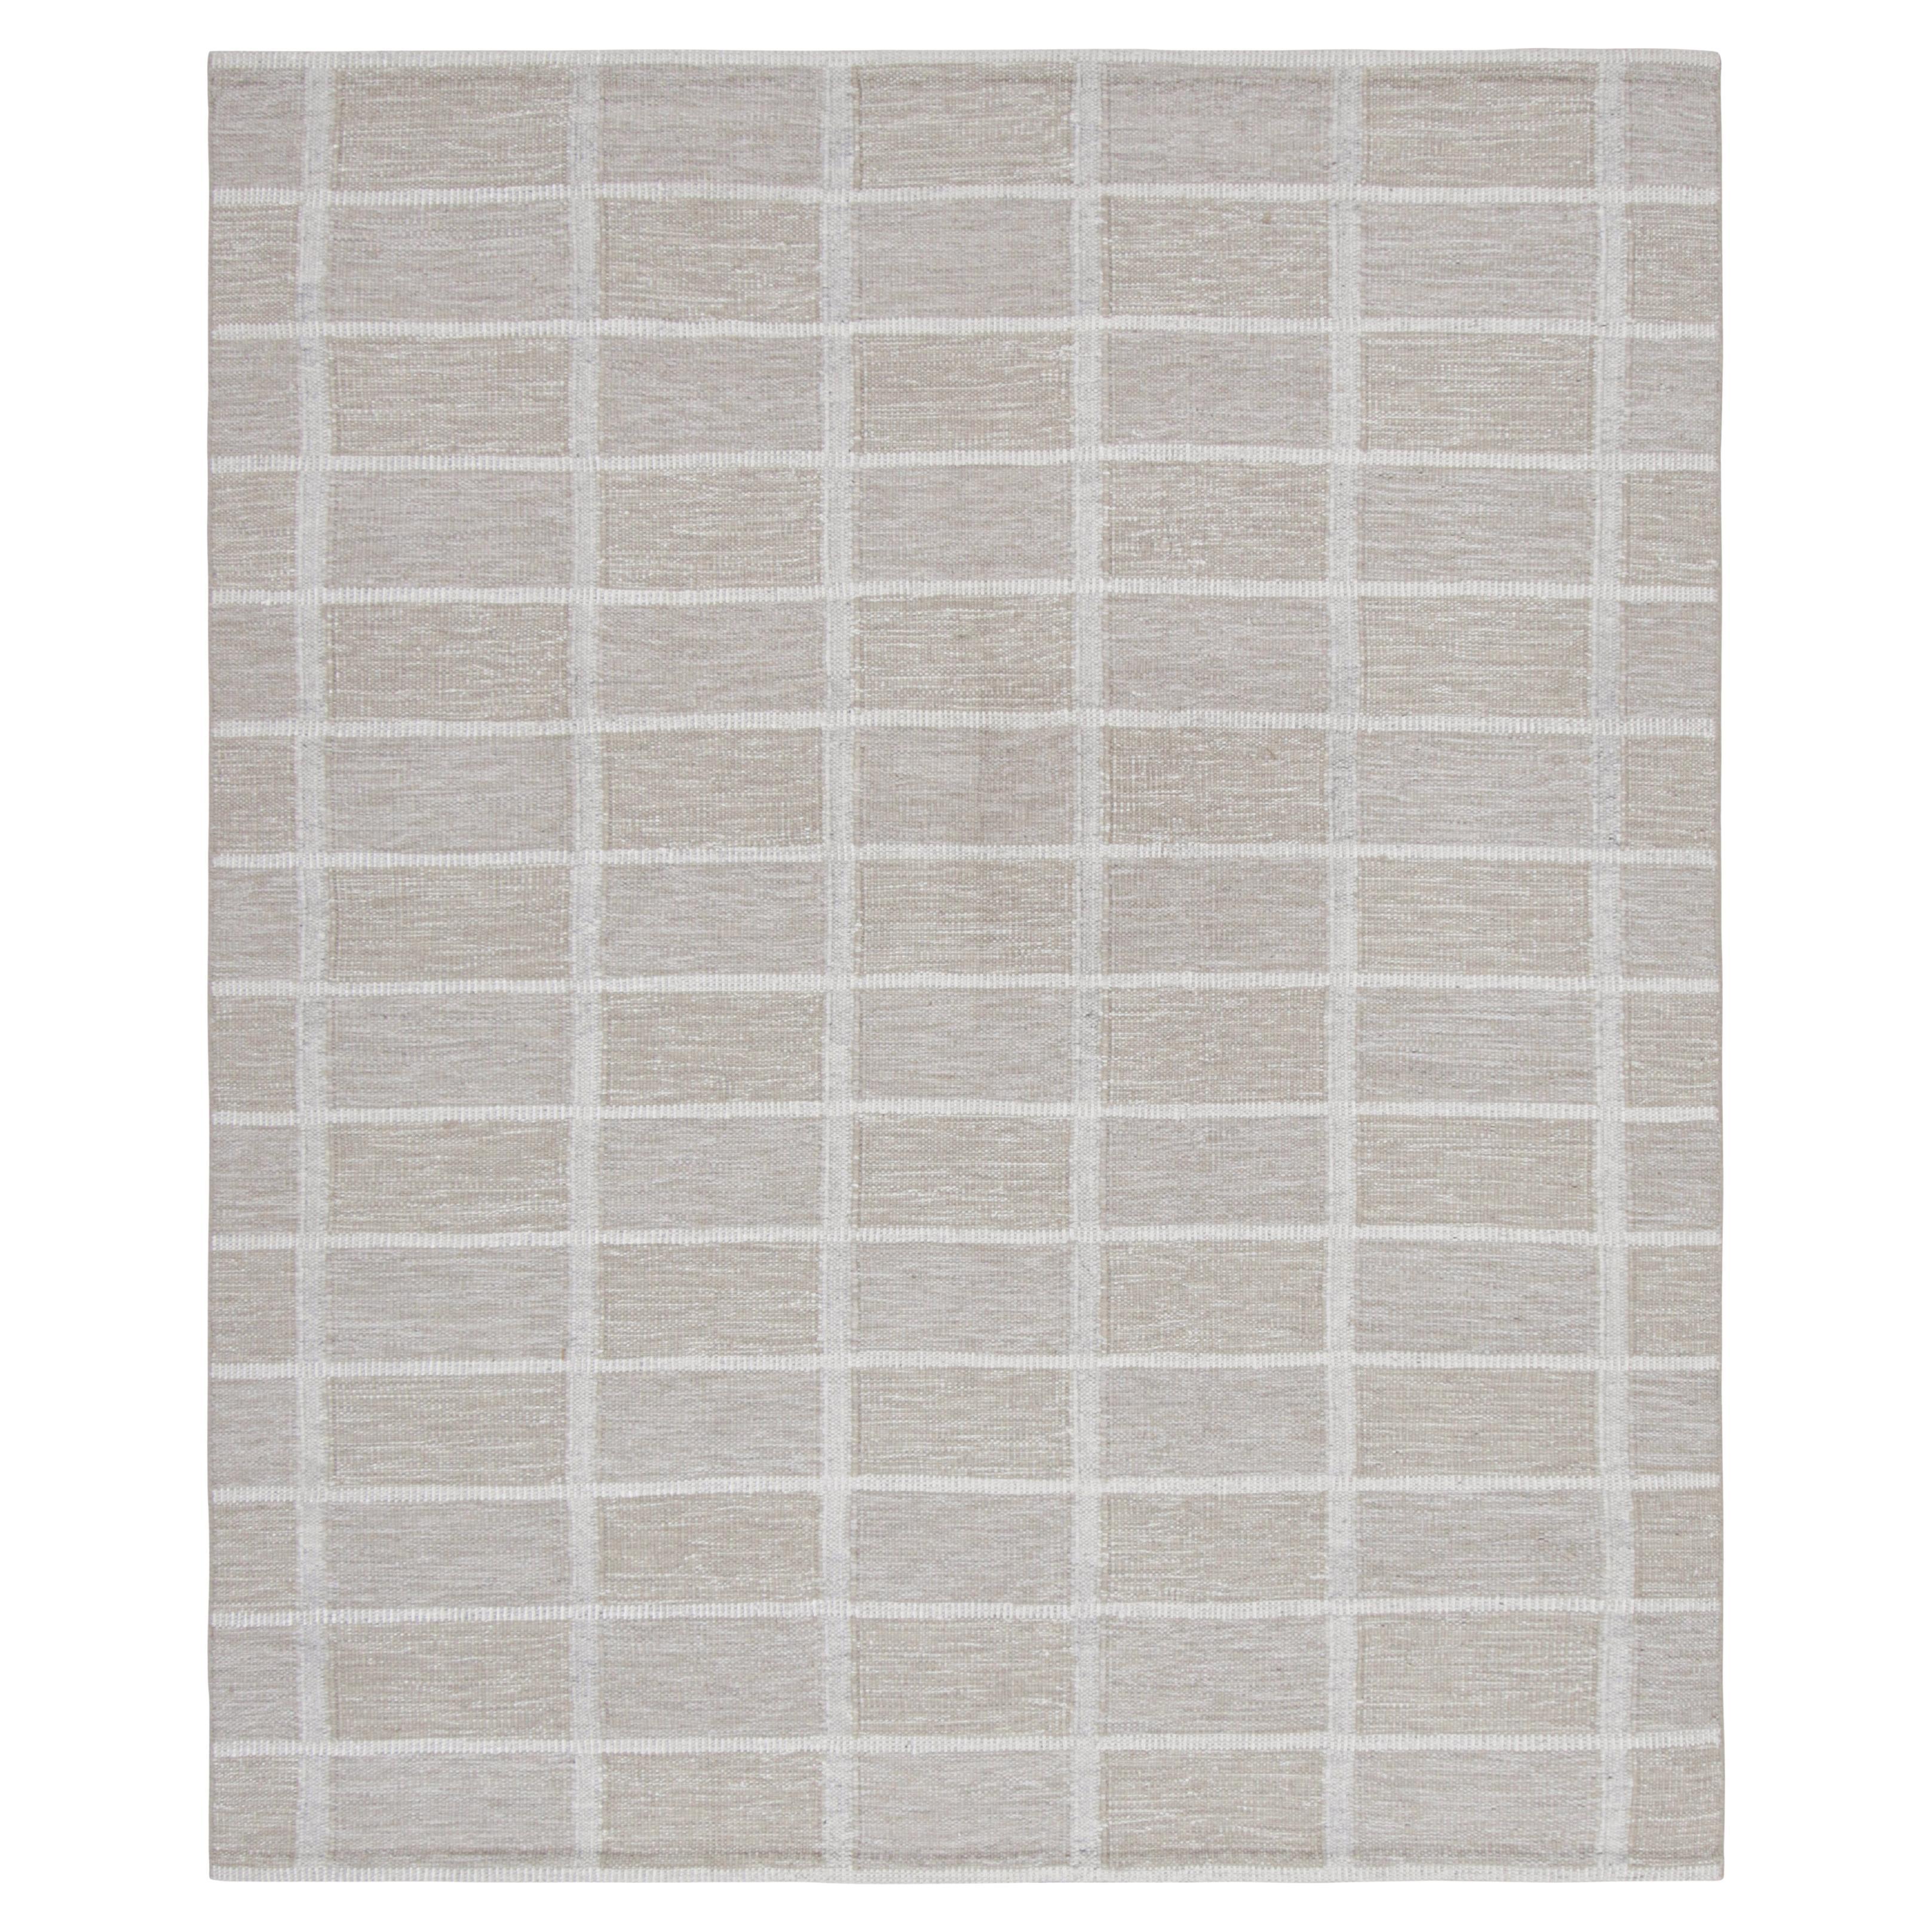 Rug & Kilim’s Scandinavian Style Rug in Beige with Gray and White Grid Patterns